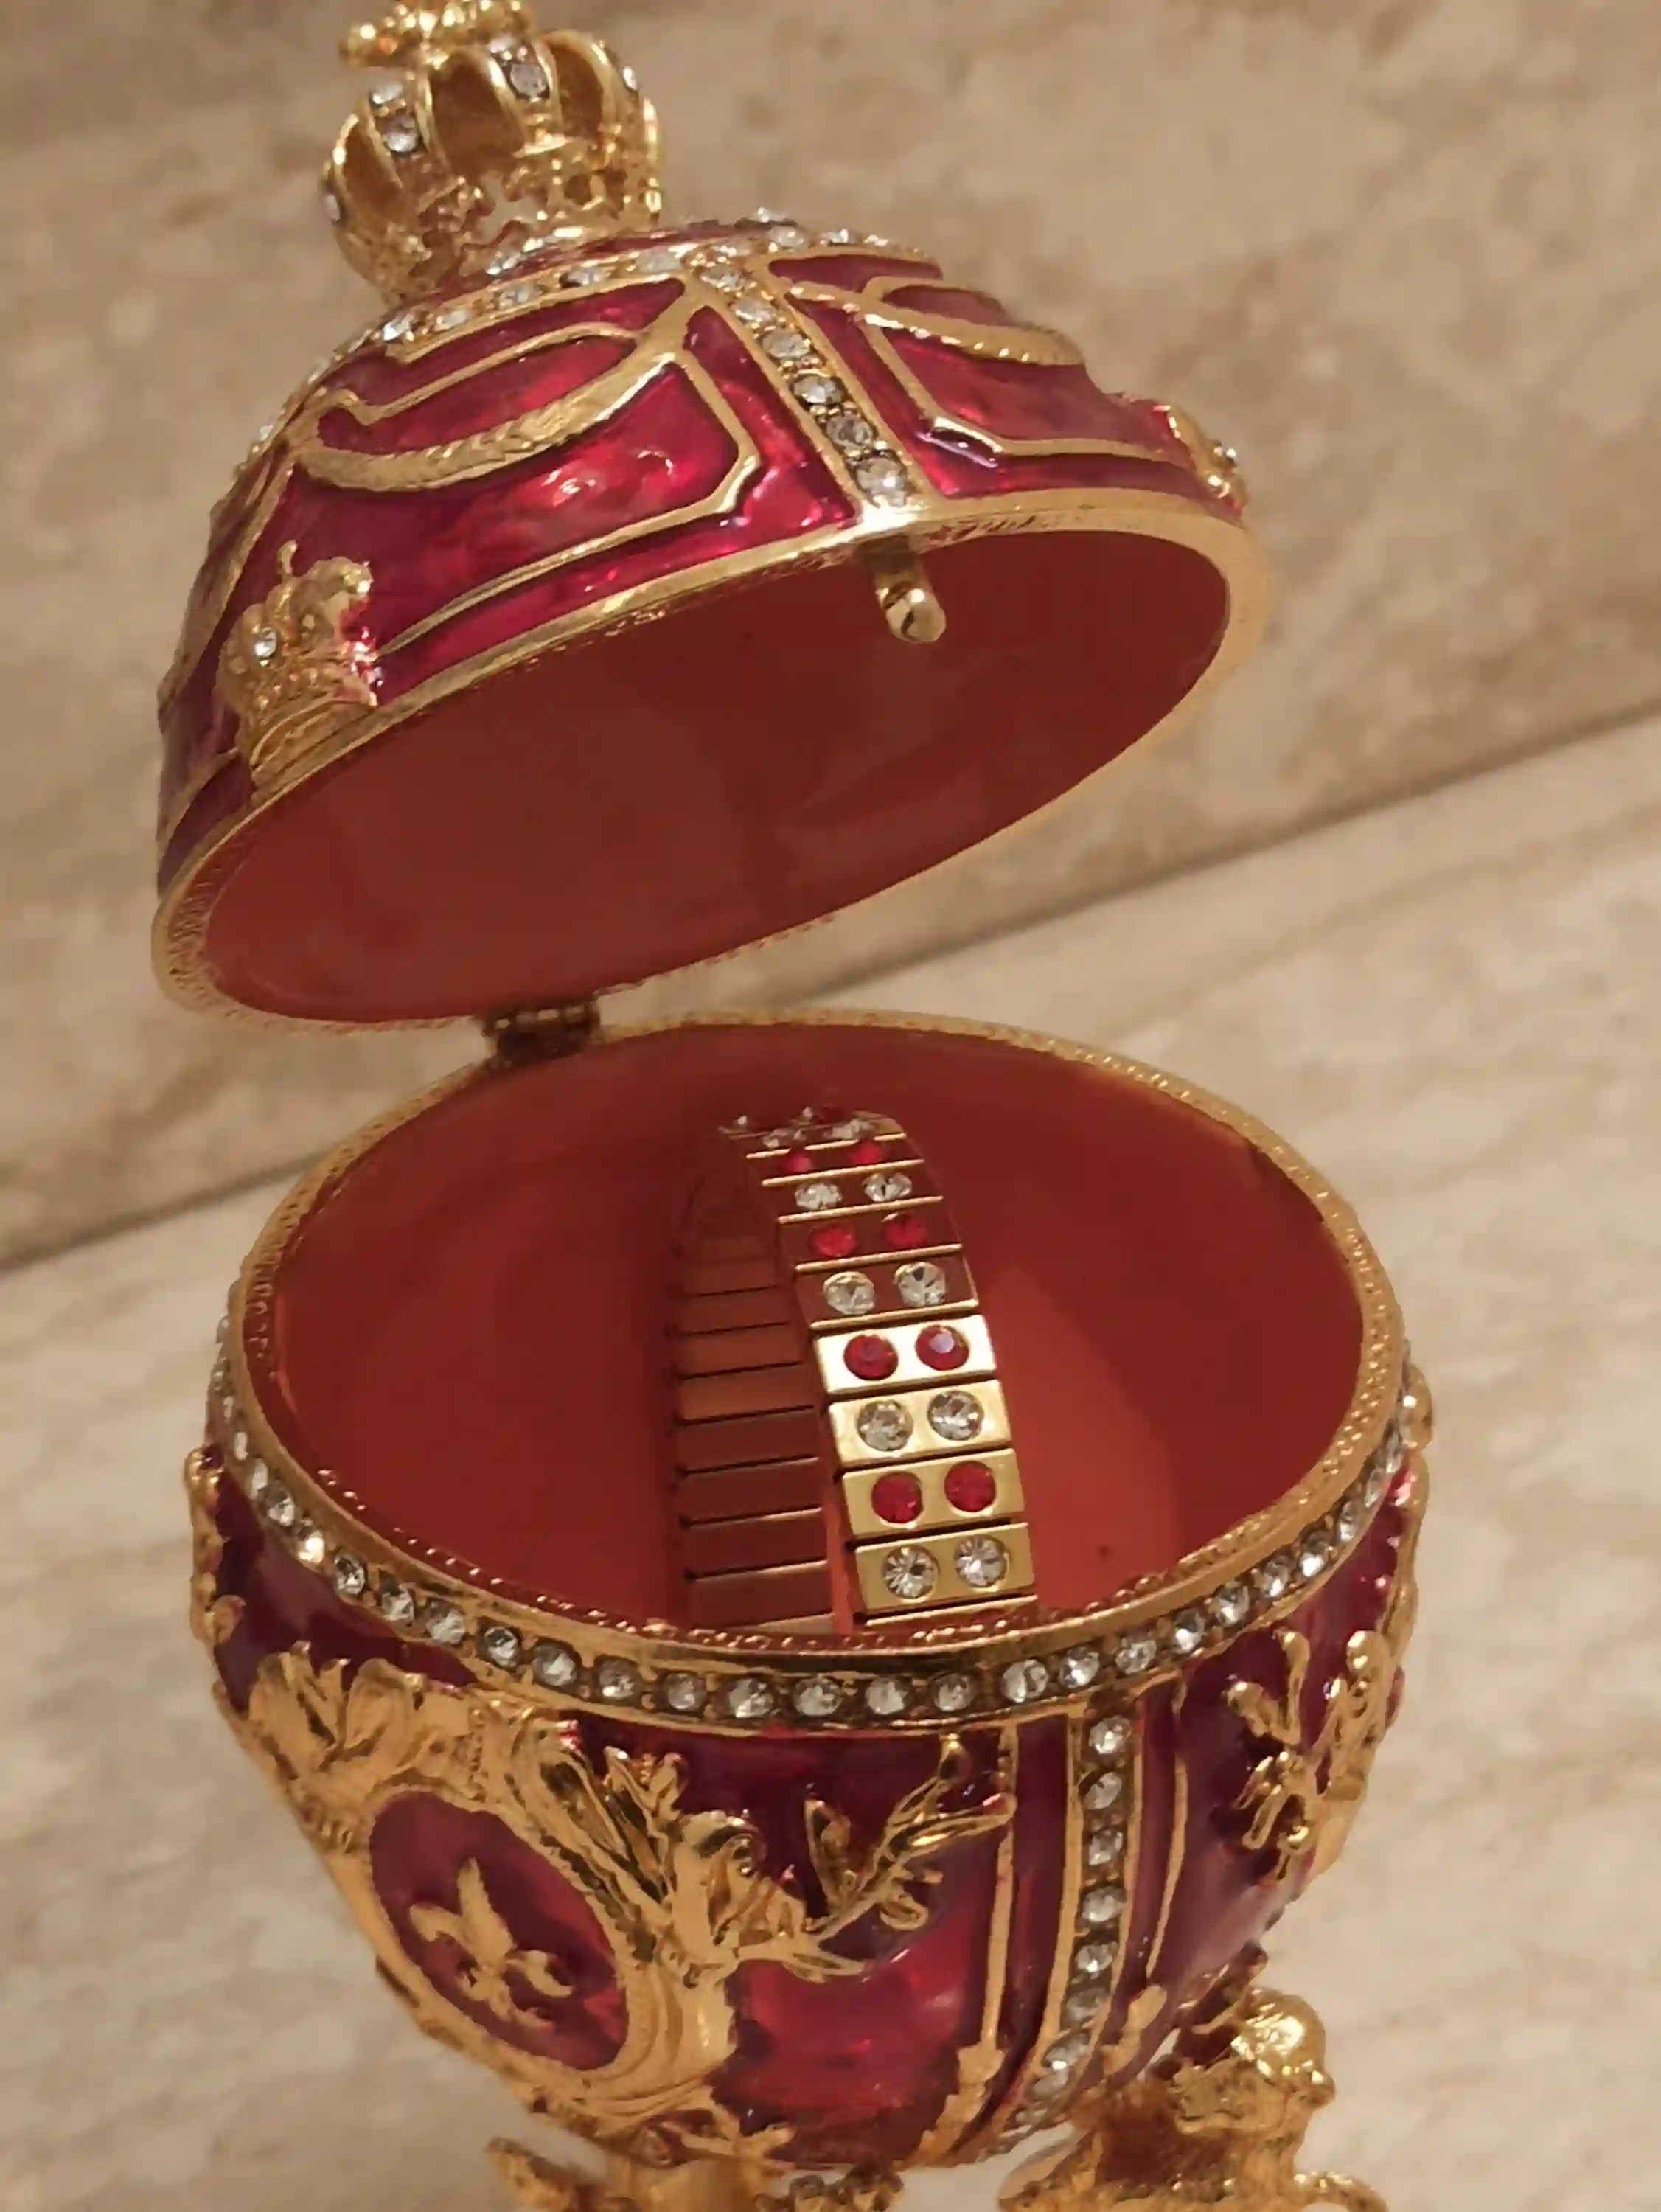 Faberge egg Trinket box Fabrege style 24K GOLD IMPERIAL Lions 200 Austrian Crystals HANDSET Diamonds 2ct Bracelet Faberge Egg Jewelry box 